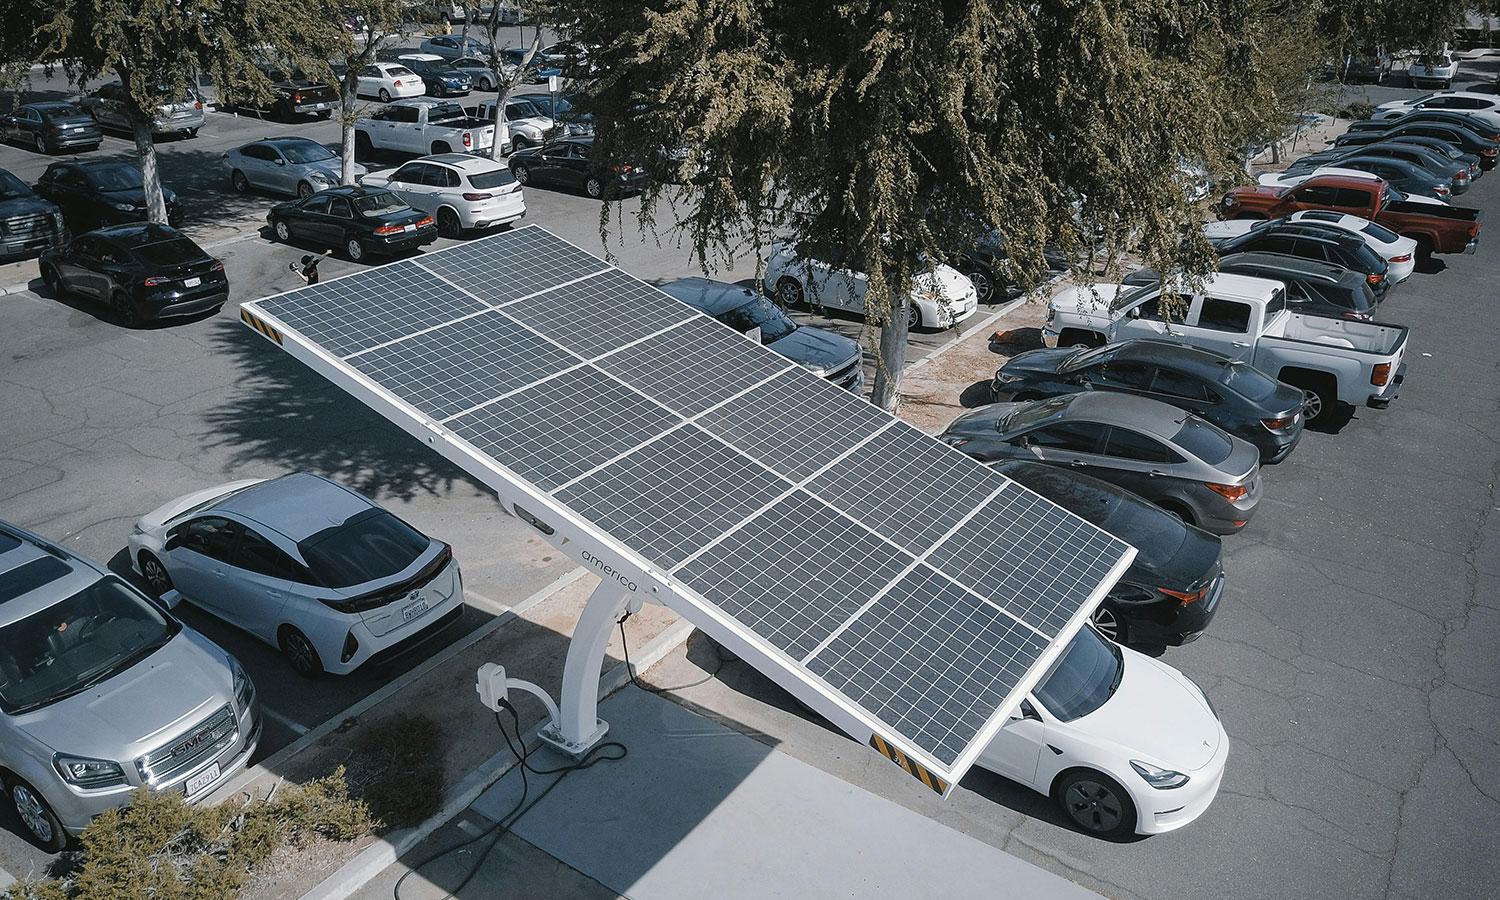 a solar charger for electric vehicles in a parking lot